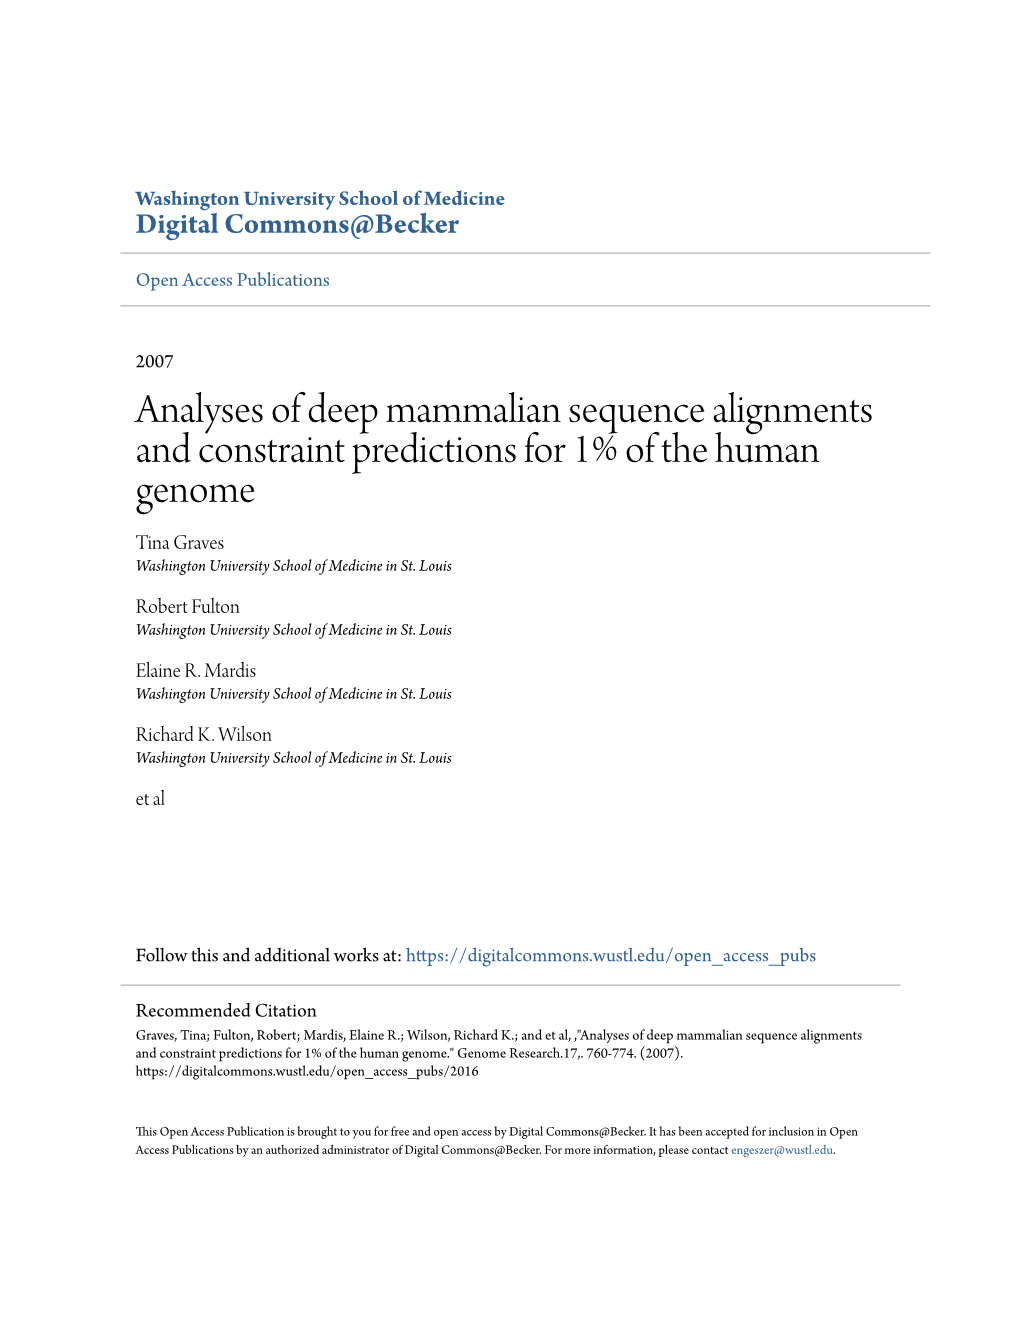 Analyses of Deep Mammalian Sequence Alignments and Constraint Predictions for 1% of the Human Genome Tina Graves Washington University School of Medicine in St